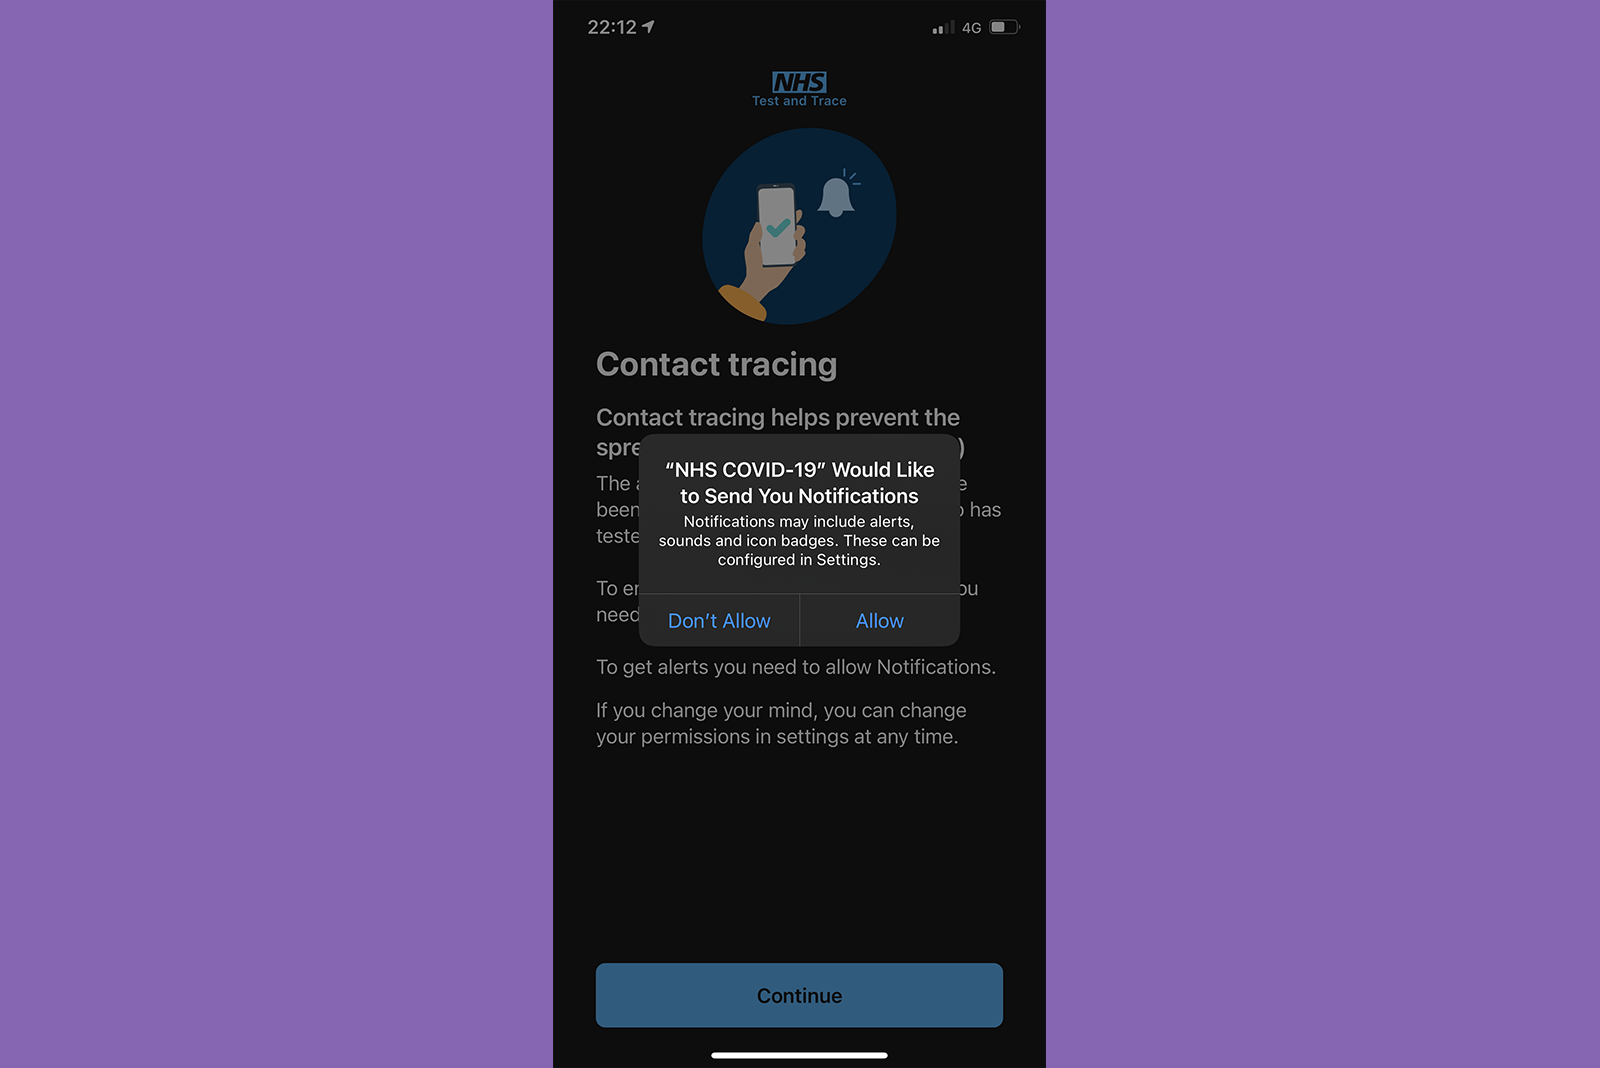 The UK's NHS COVID-19 contact tracing app goes live